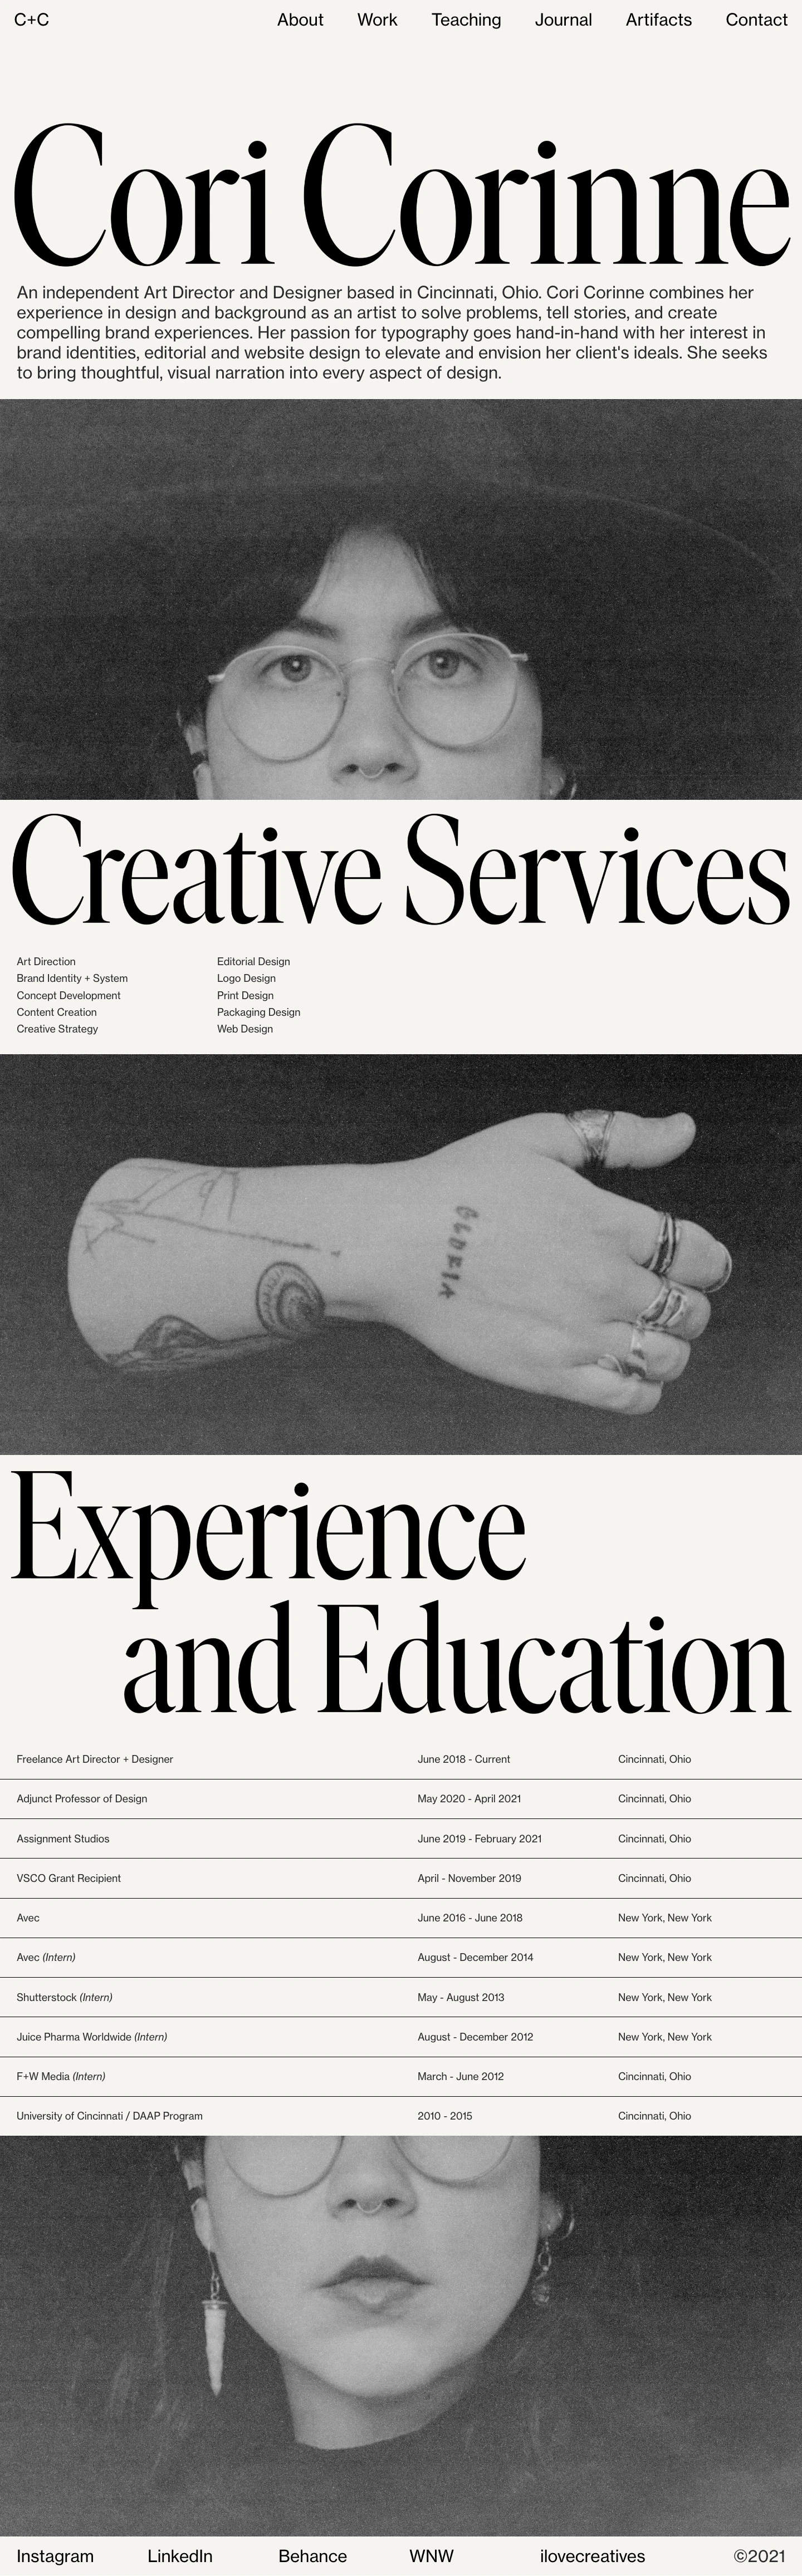 Cori Corinne Landing Page Example: An independent Art Director and Designer based in Cincinnati, Ohio. Cori Corinne combines her experience in design and background as an artist to solve problems, tell stories, and create compelling brand experiences. Her passion for typography goes hand-in-hand with her interest in brand identities, editorial and website design to elevate and envision her client's ideals. She seeks to bring thoughtful, visual narration into every aspect of design.